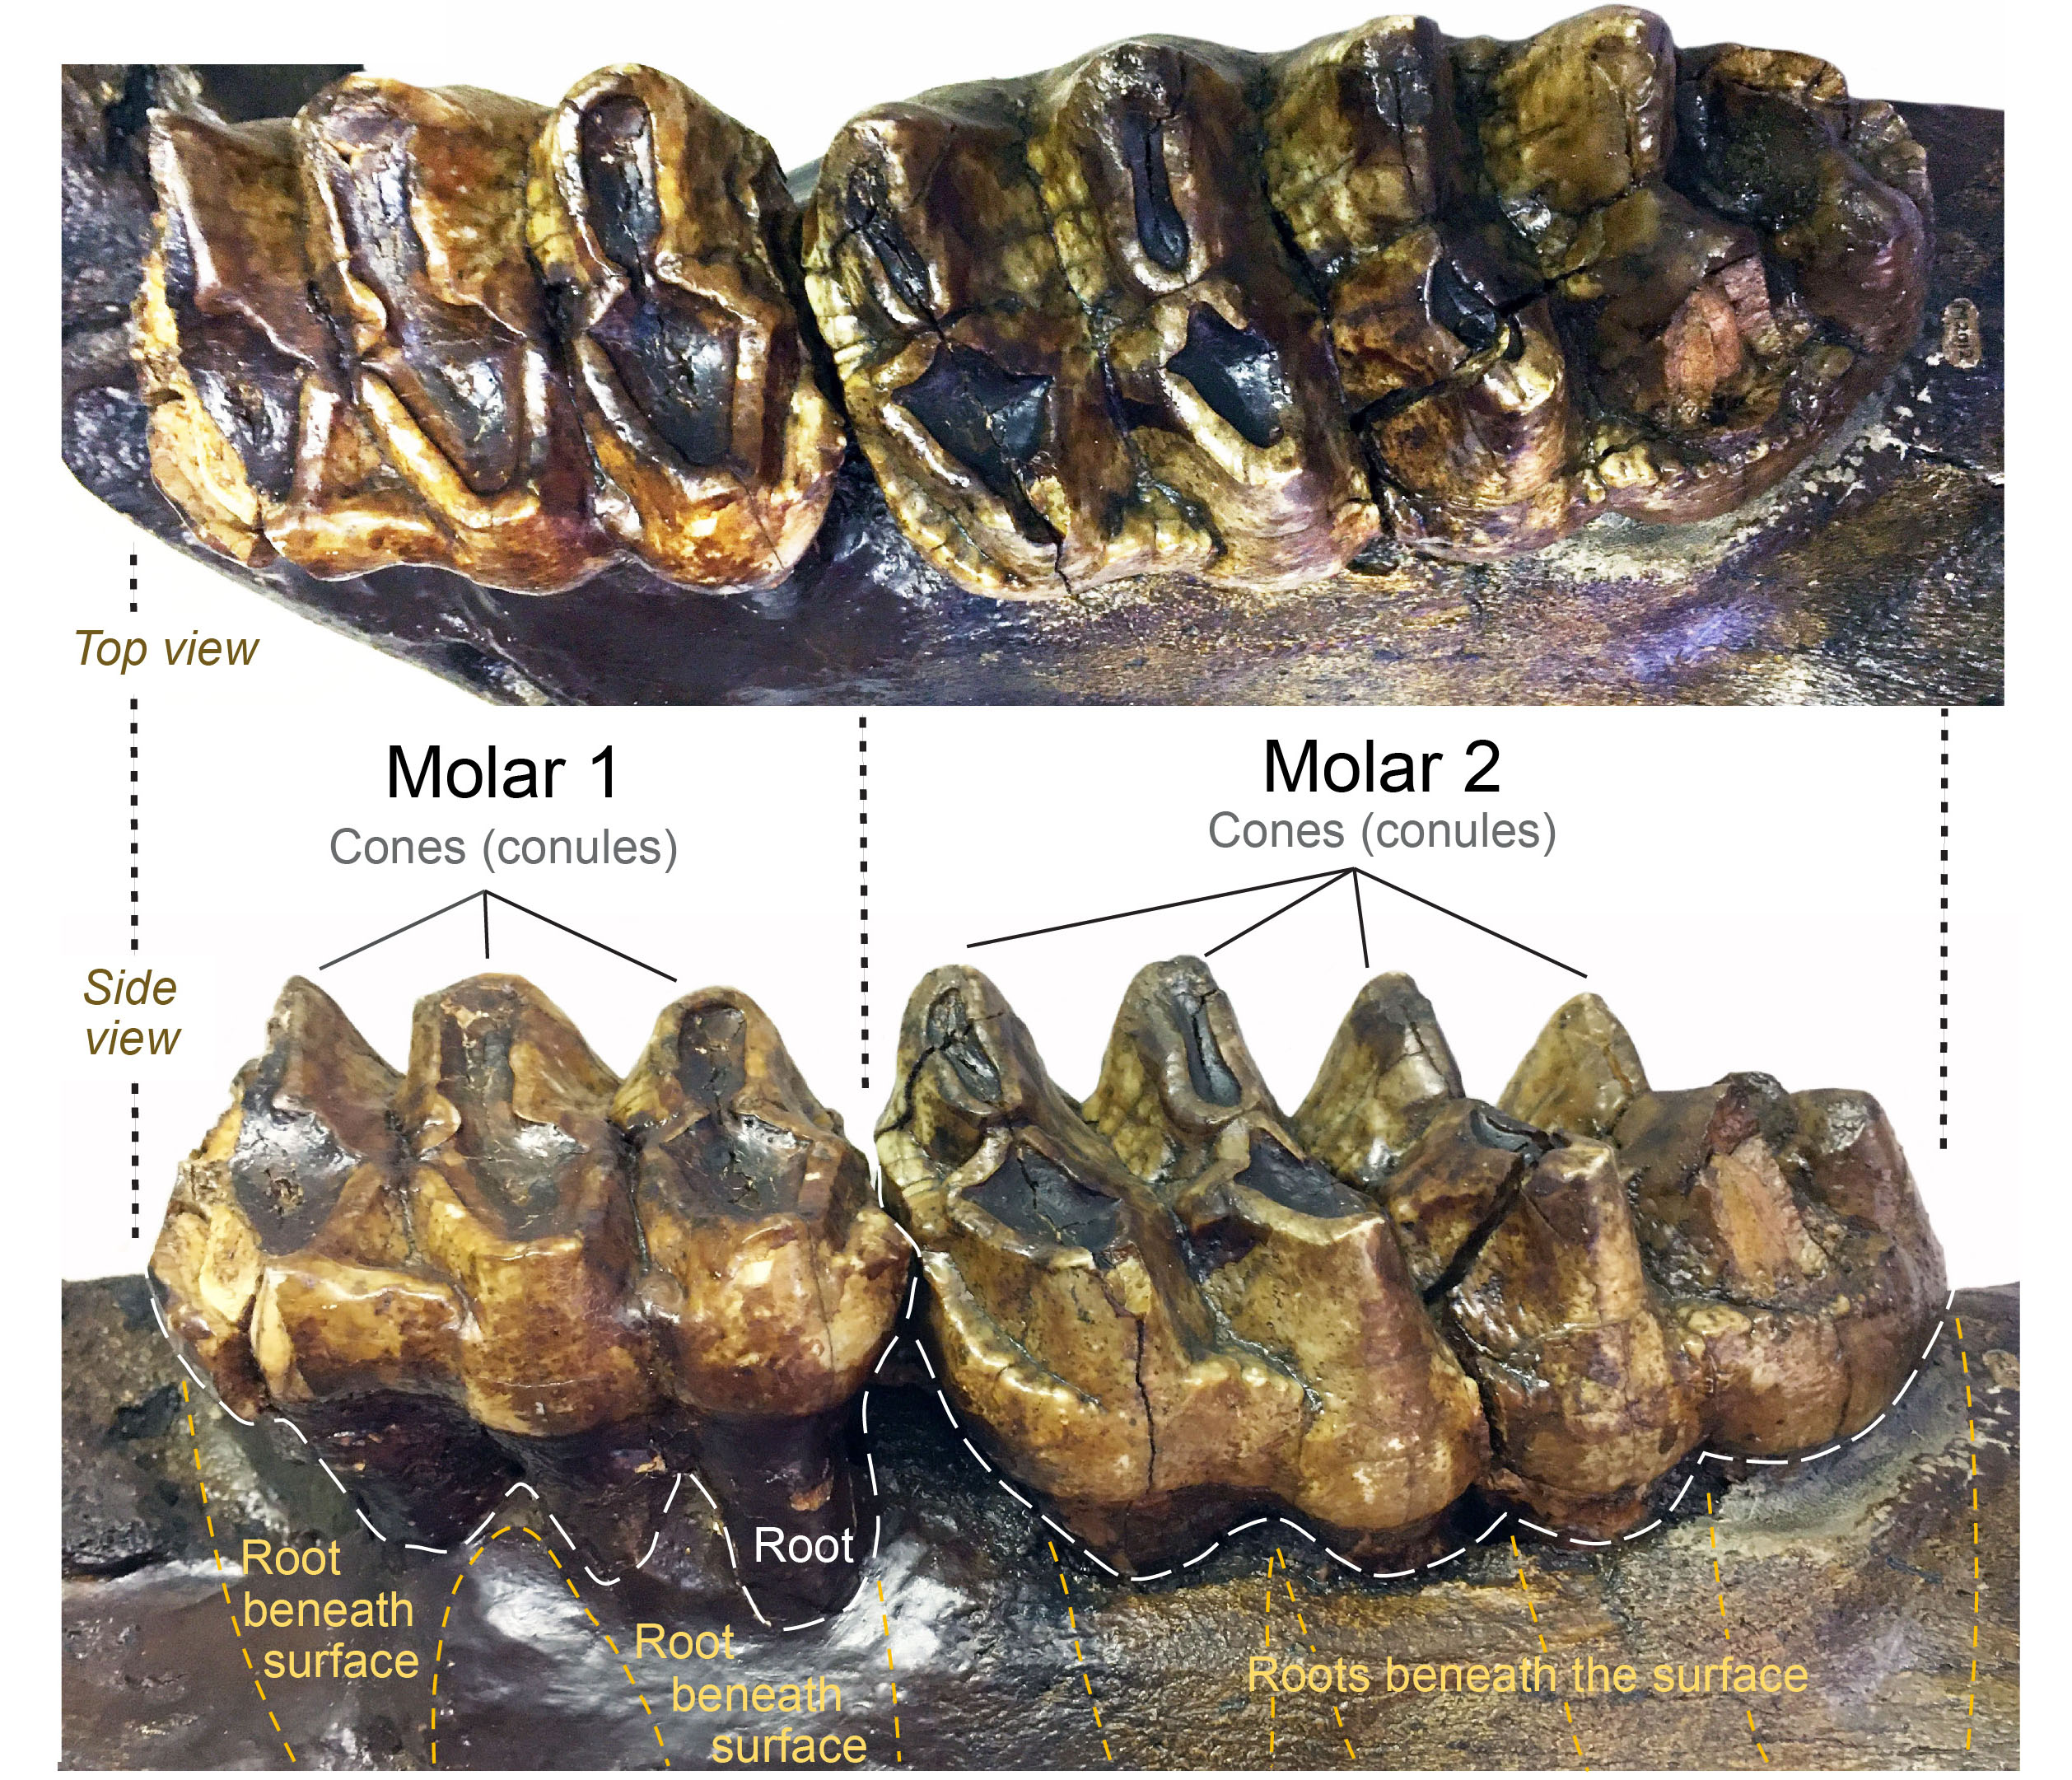 Fossil of the month: Mastodon teeth and jaw fragment